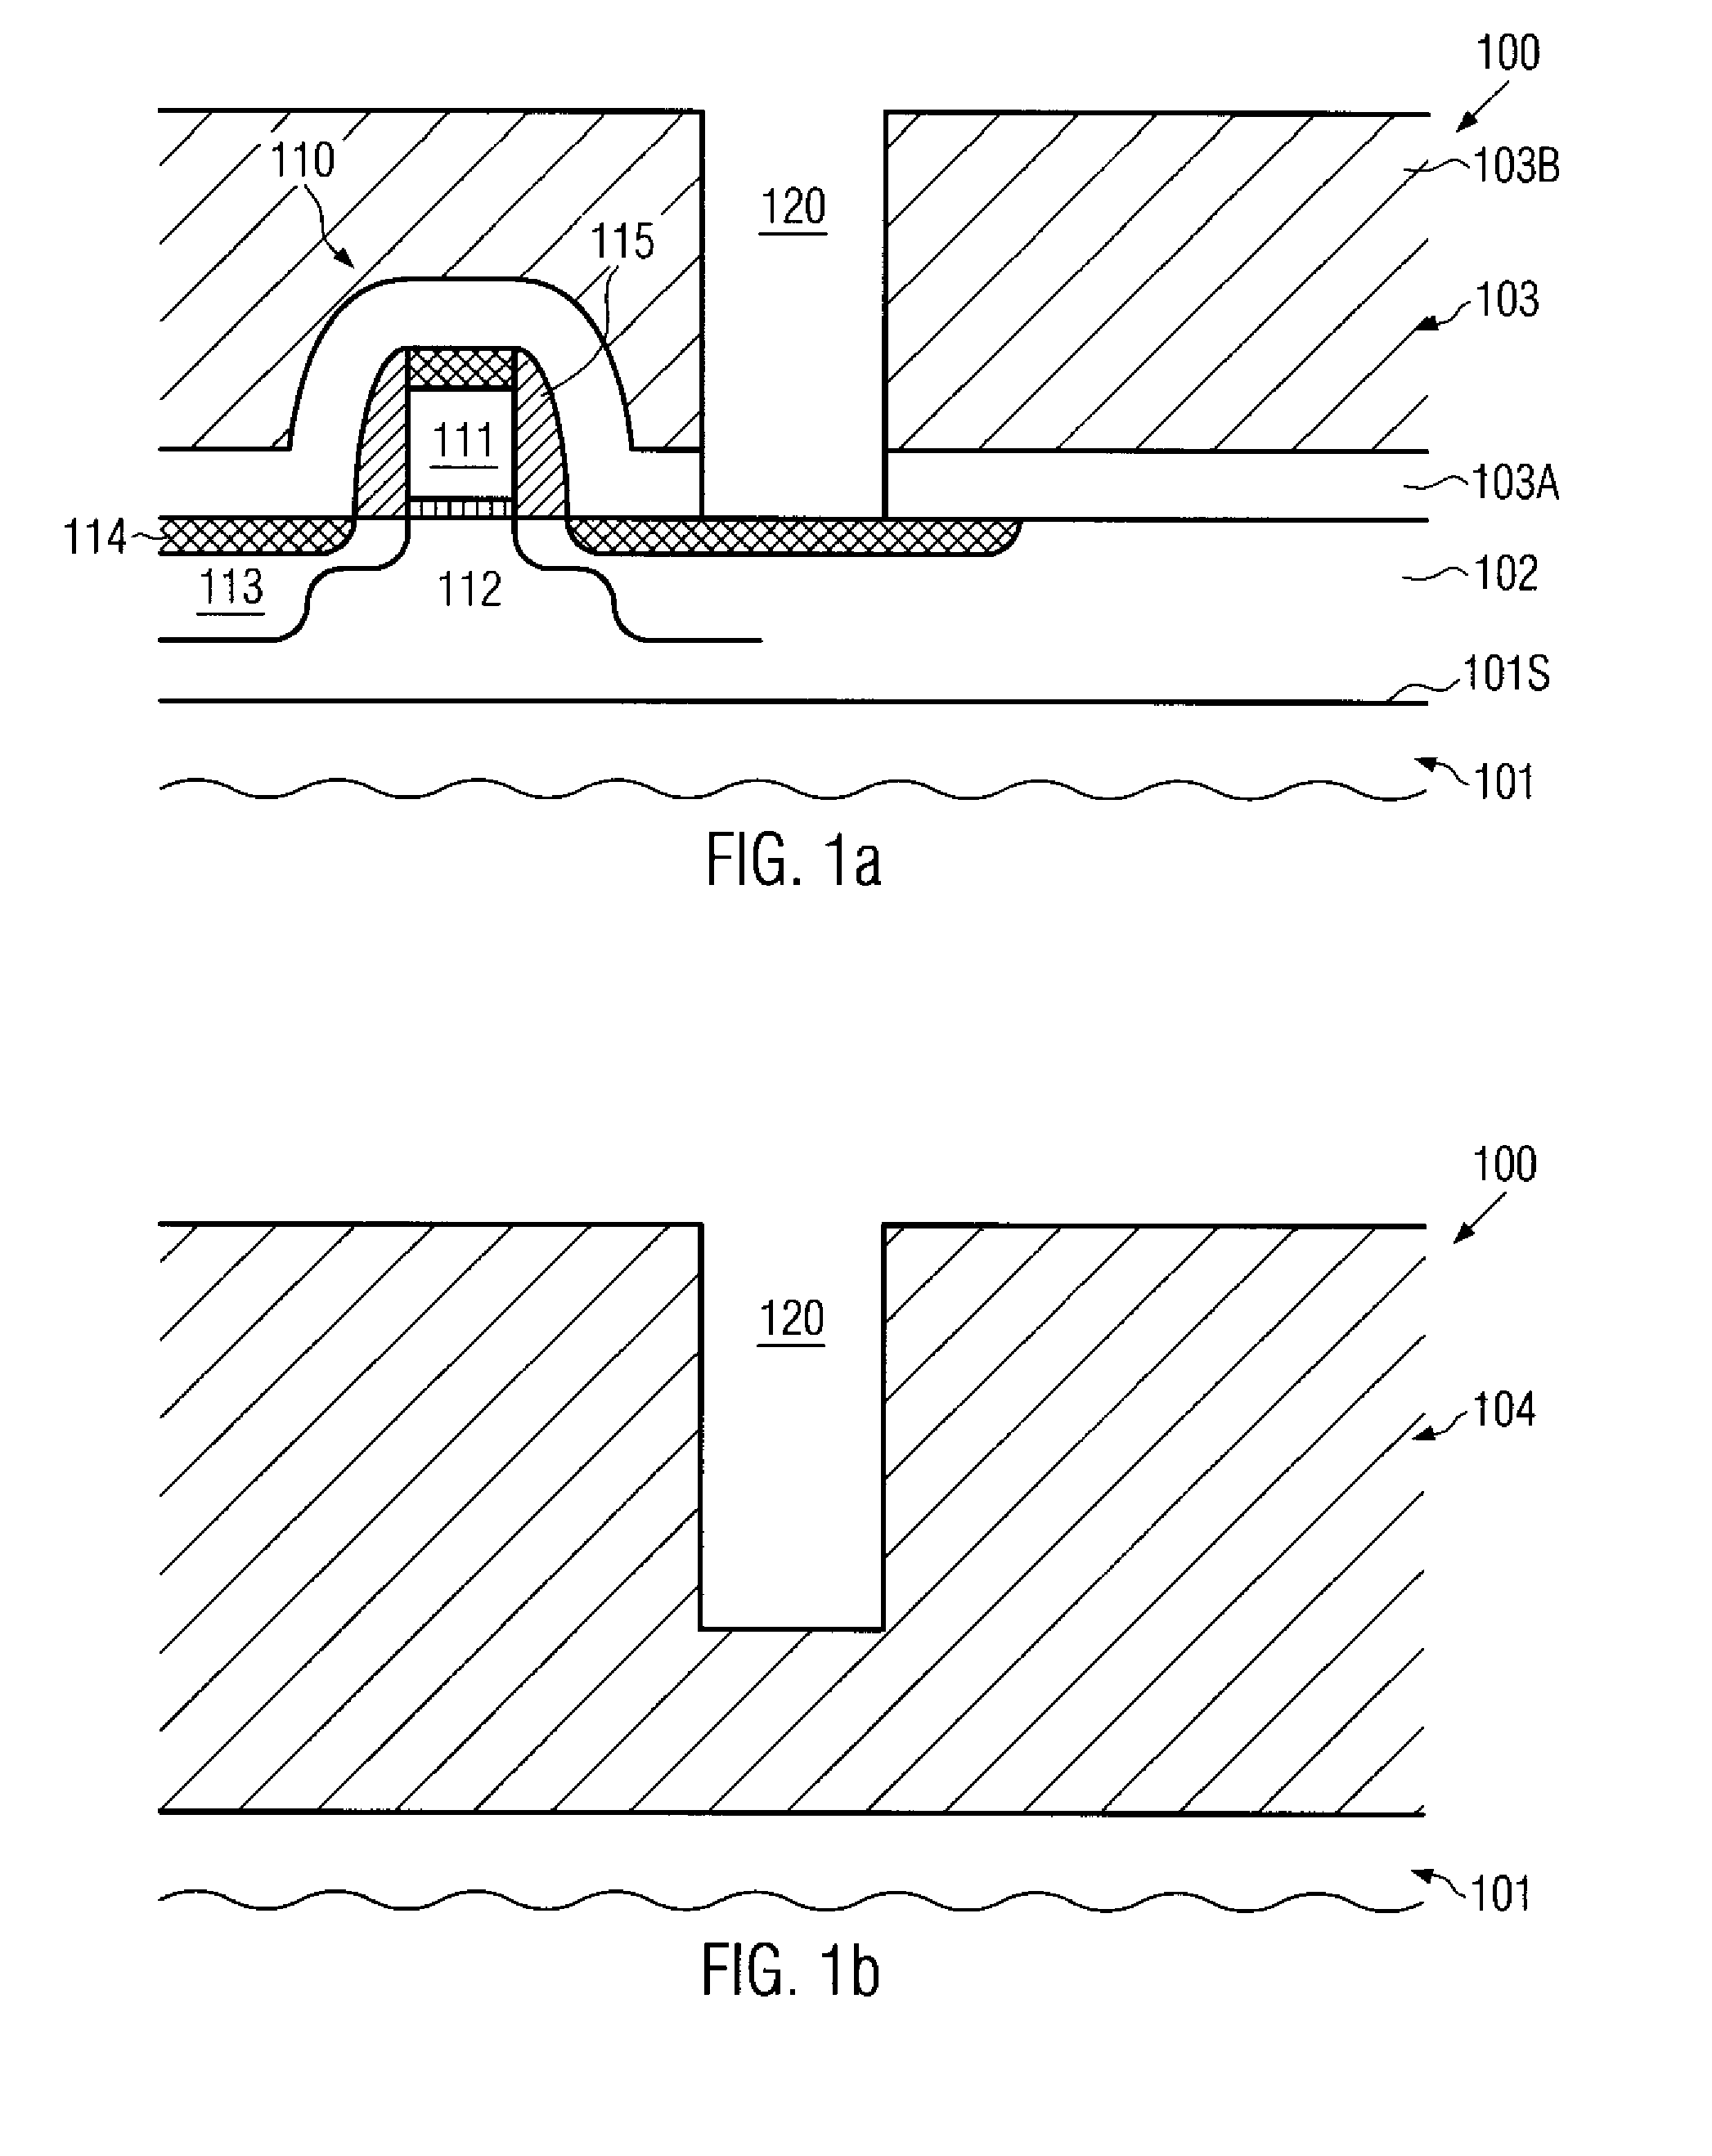 Method of forming a metal layer over a patterned dielectric by electroless deposition using a selectively provided activation layer